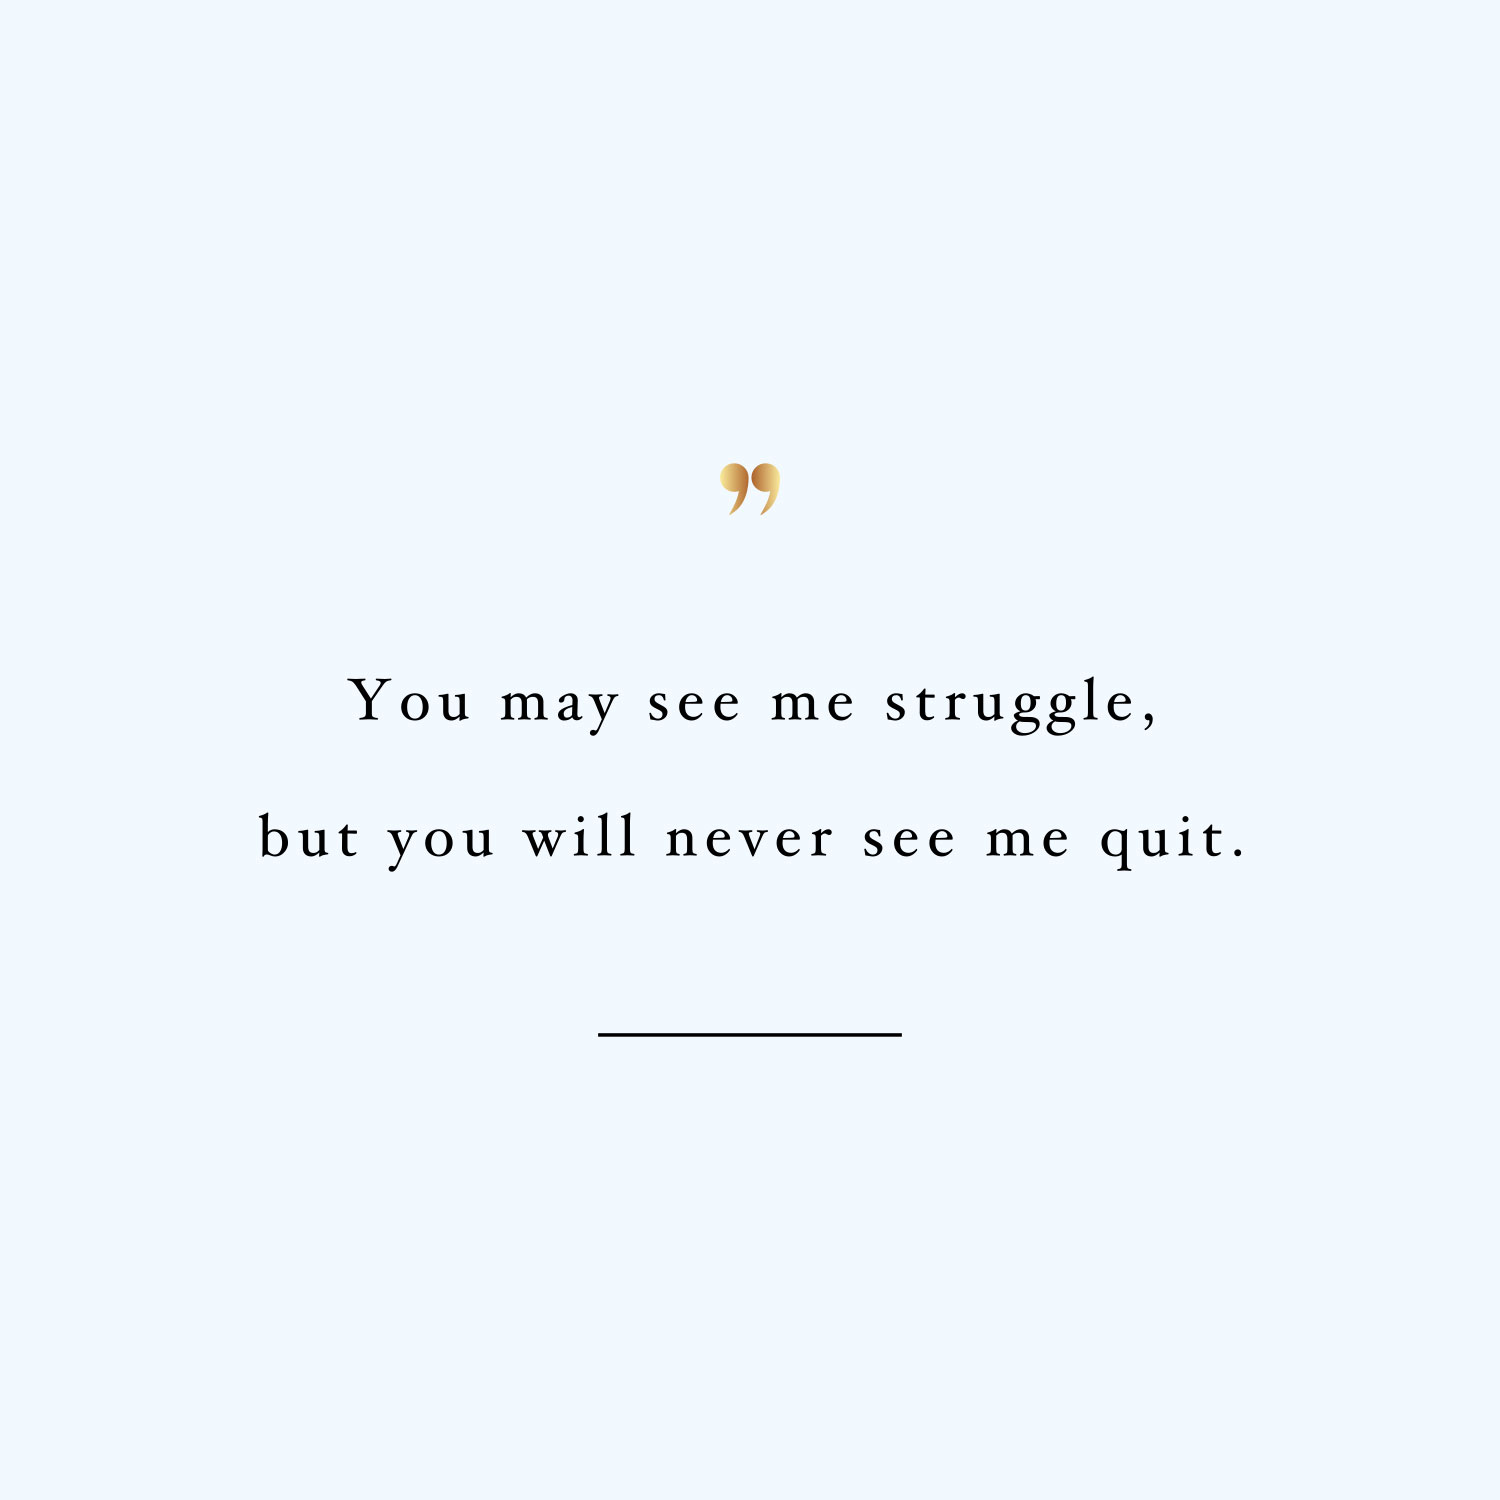 Struggle but never quit! Browse our collection of healthy lifestyle inspirational quotes and get instant weight loss and training motivation. Stay focused and get fit, healthy and happy! https://www.spotebi.com/workout-motivation/struggle-but-never-quit/